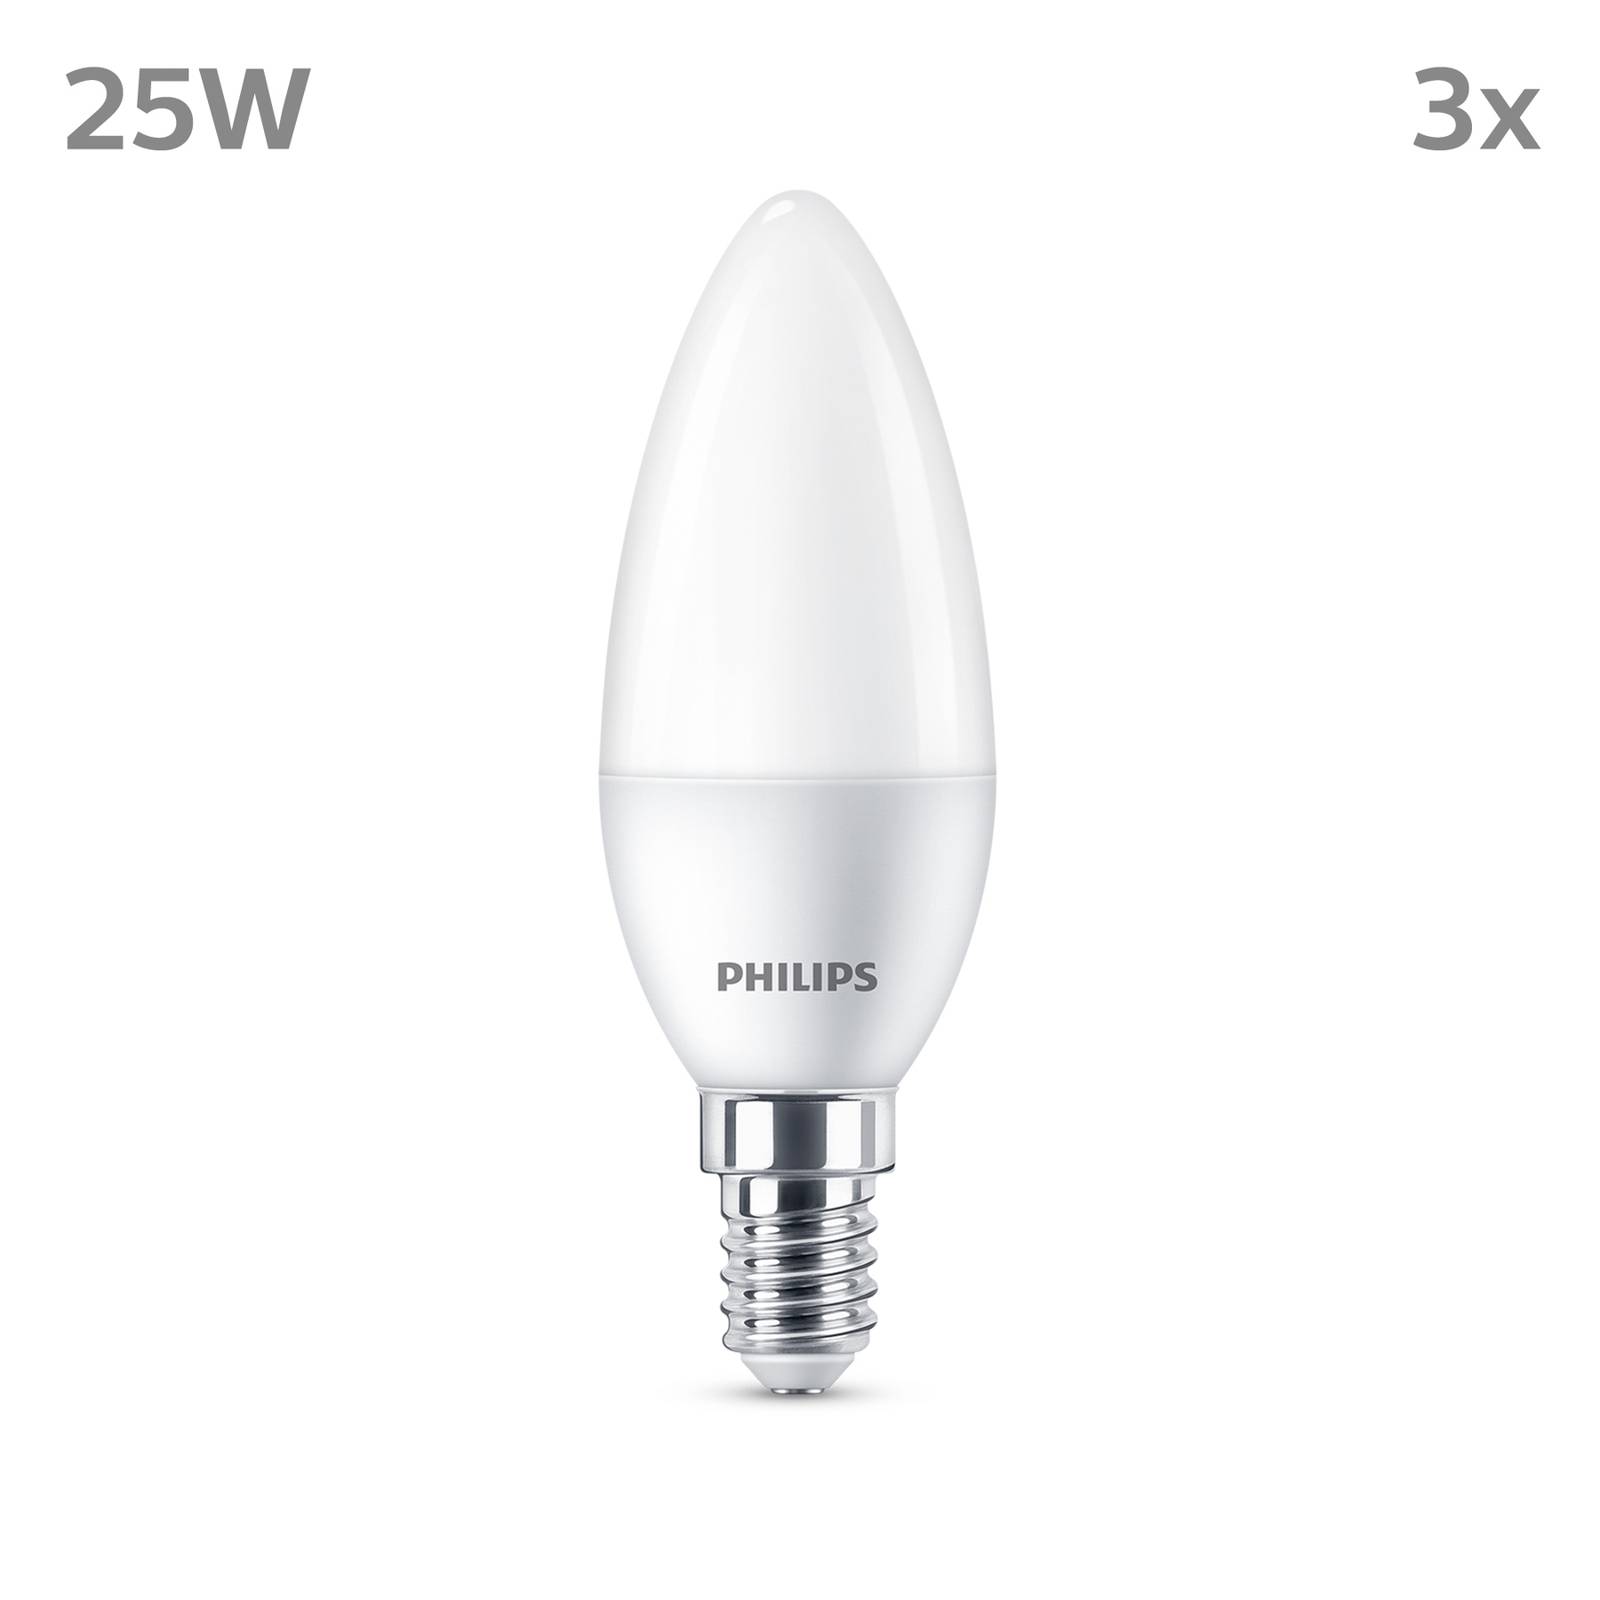 Philips bougie LED E14 2,8W 250lm 2 700K mate x3